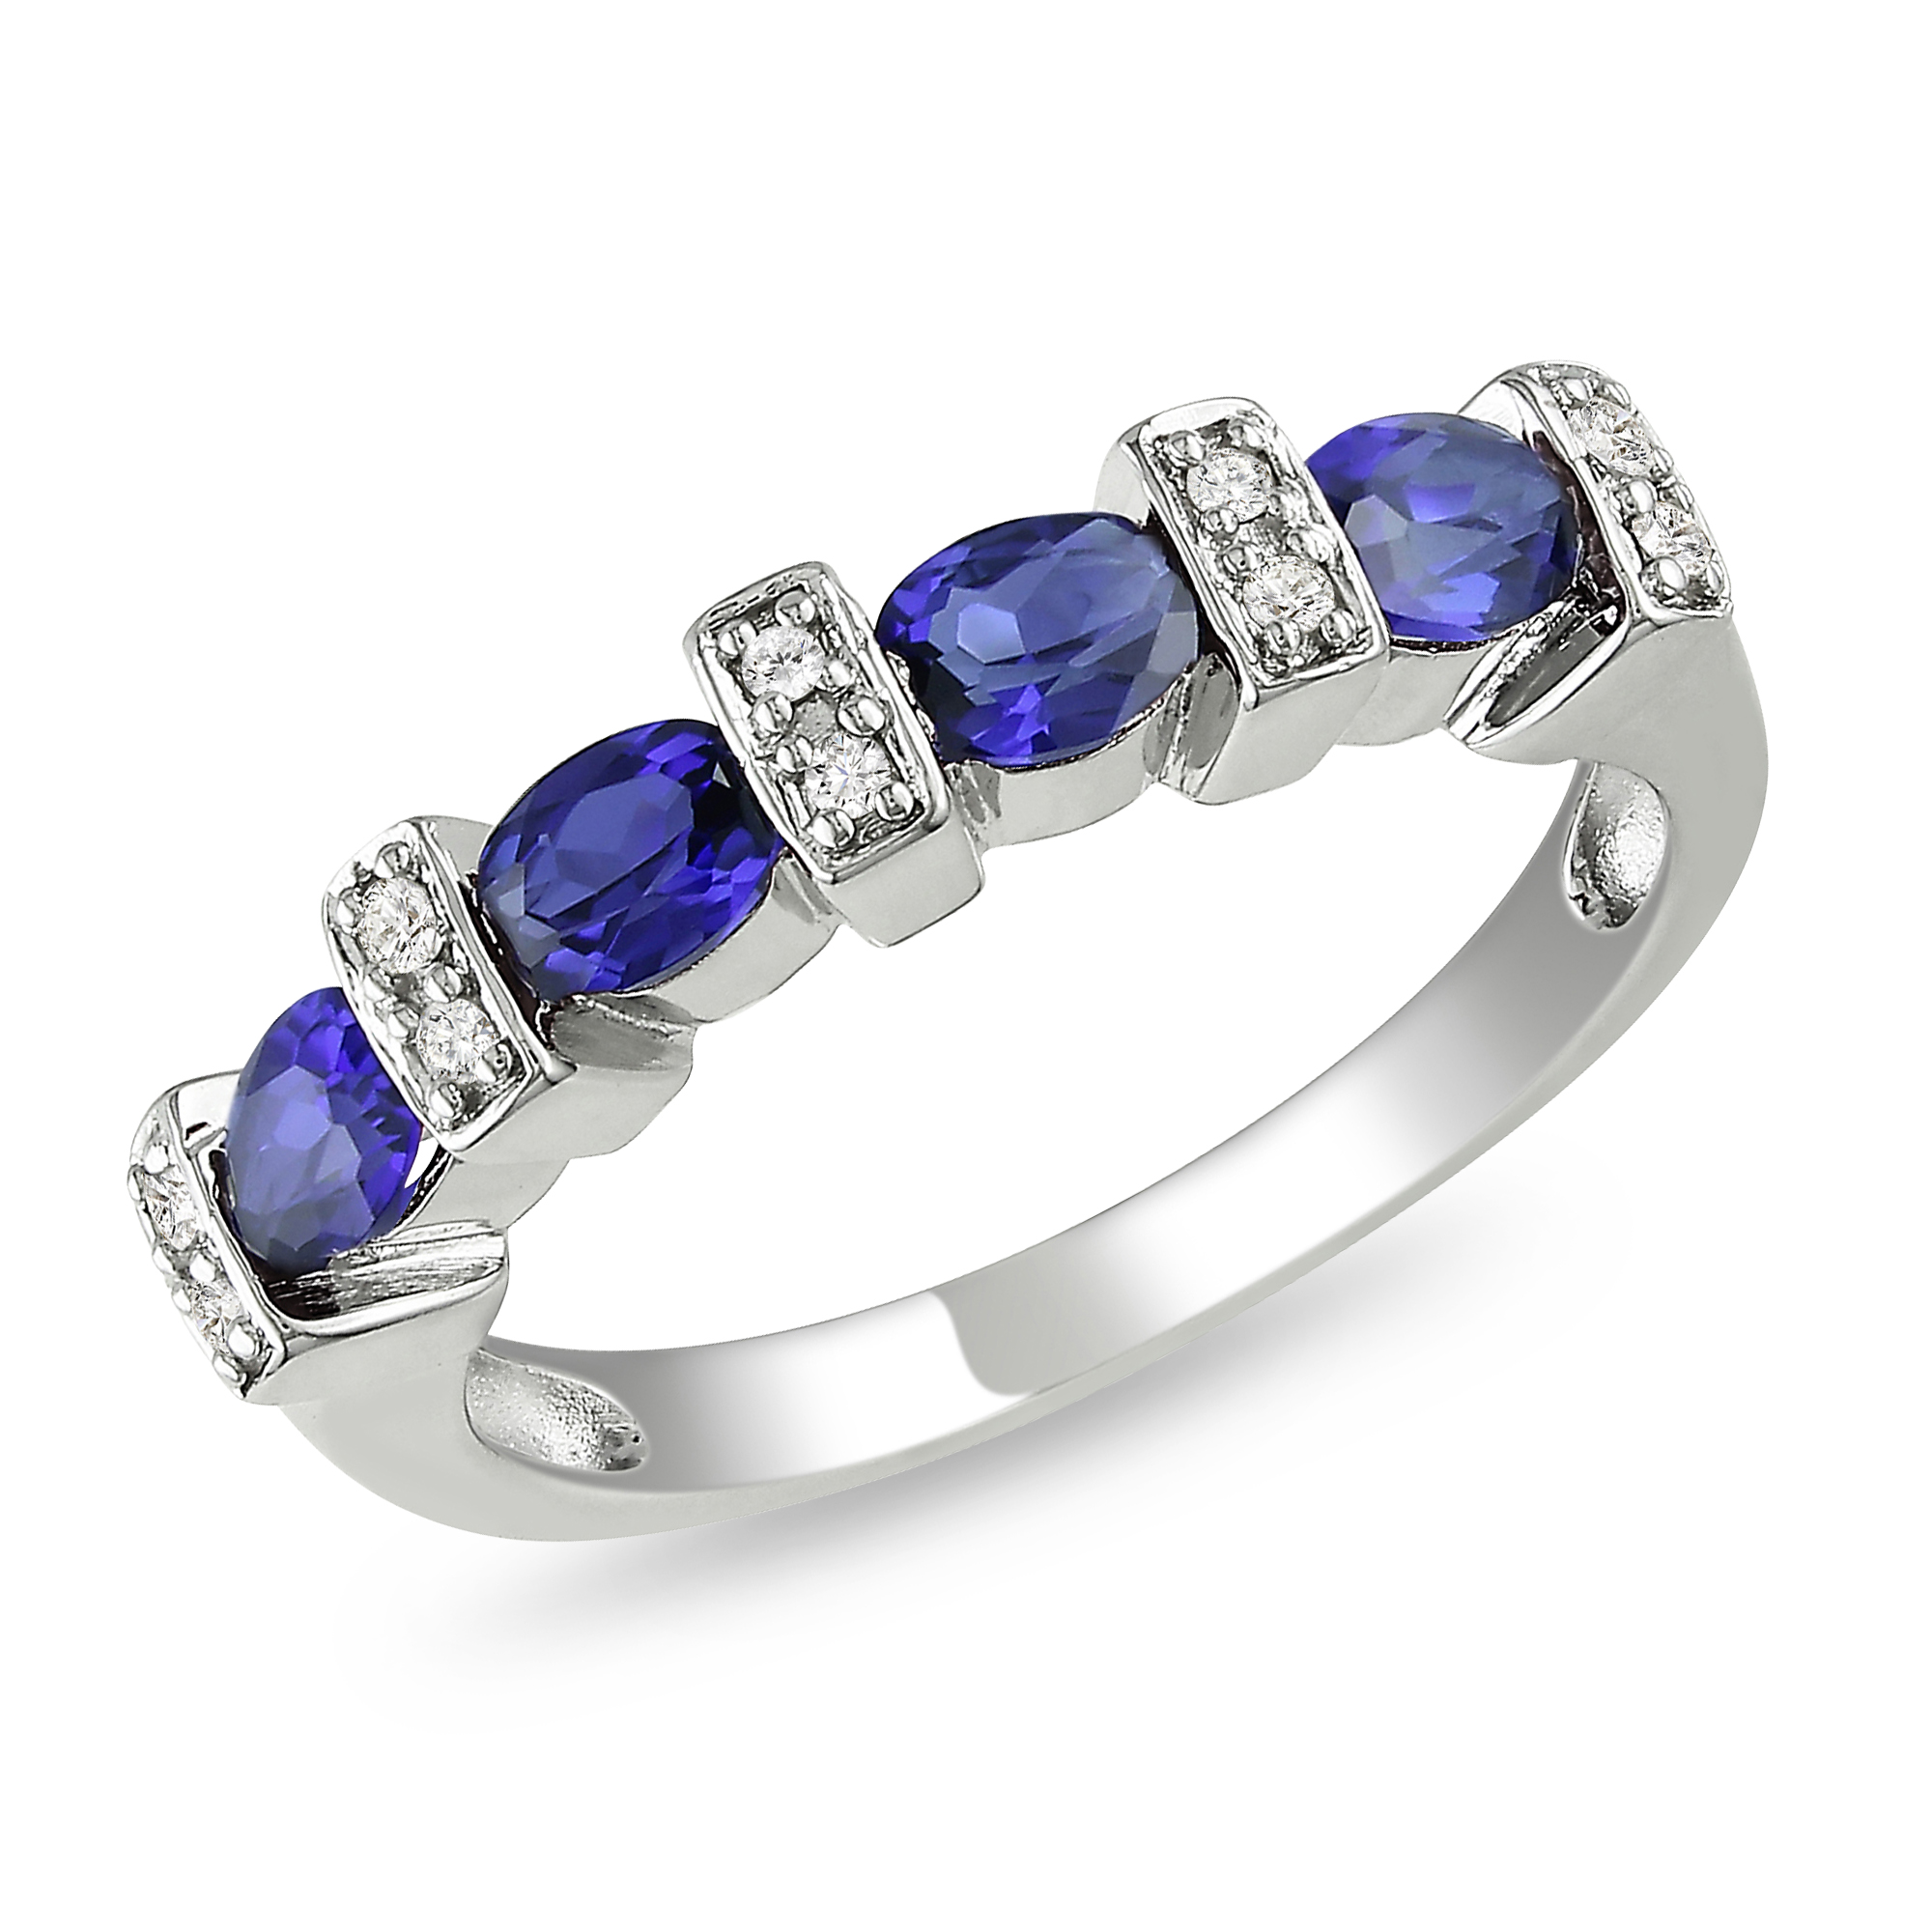 0.05 Carat T.W. Diamond and 1 Carat T.G.W. Created Blue Sapphire Fashion Ring in Sterling Silver GH I3